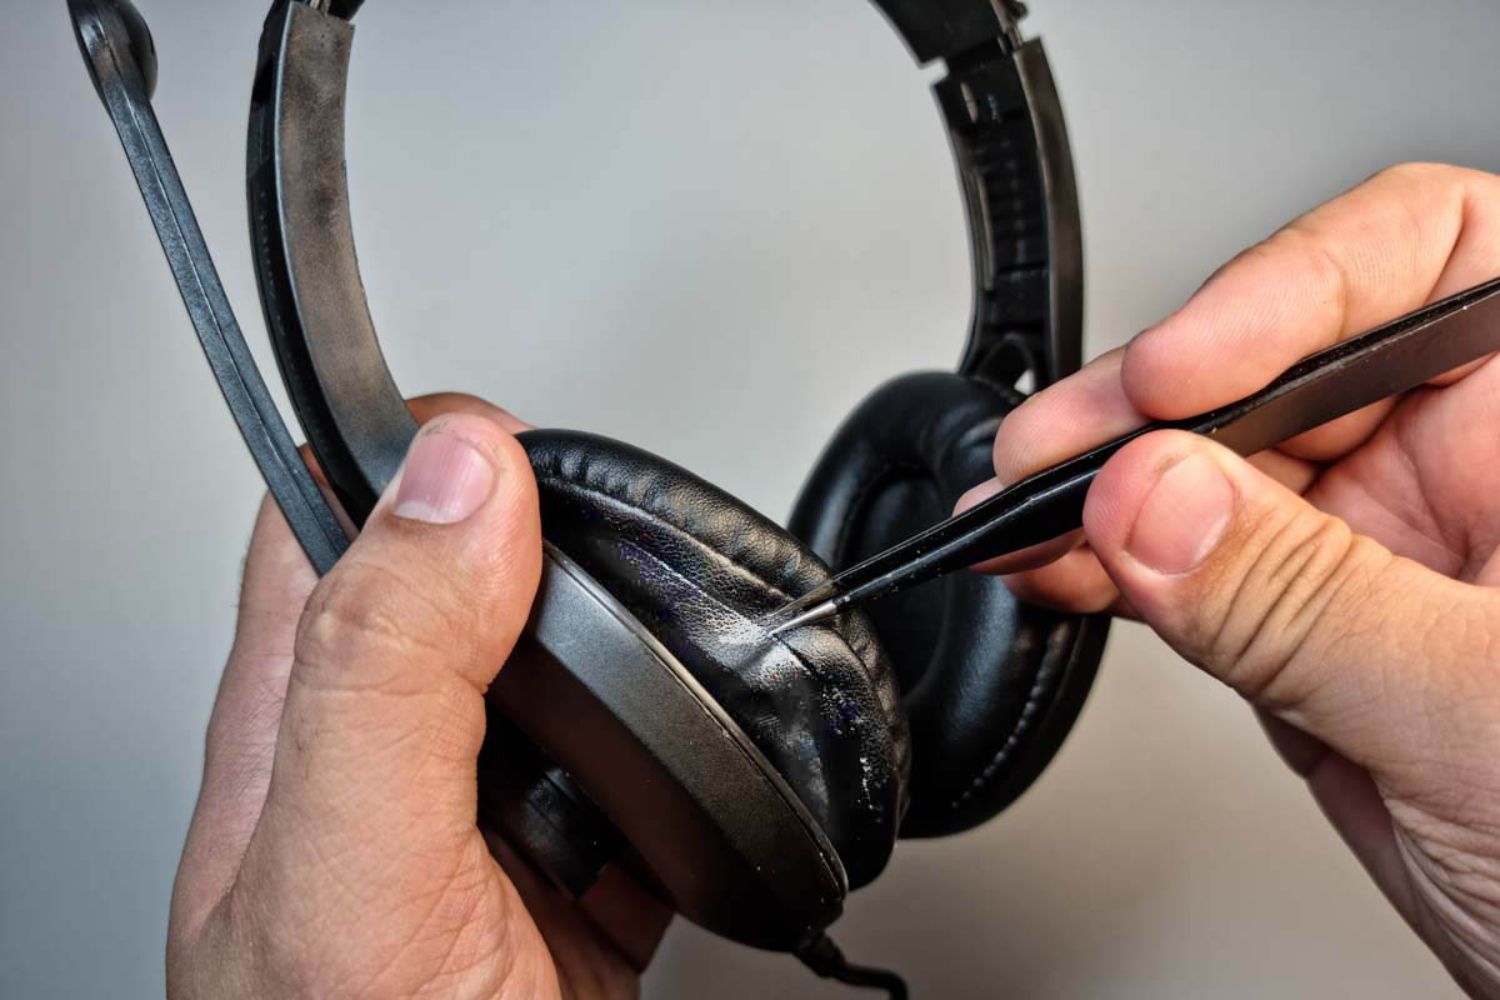 Over-Ear Headphones: How To Remove Padding